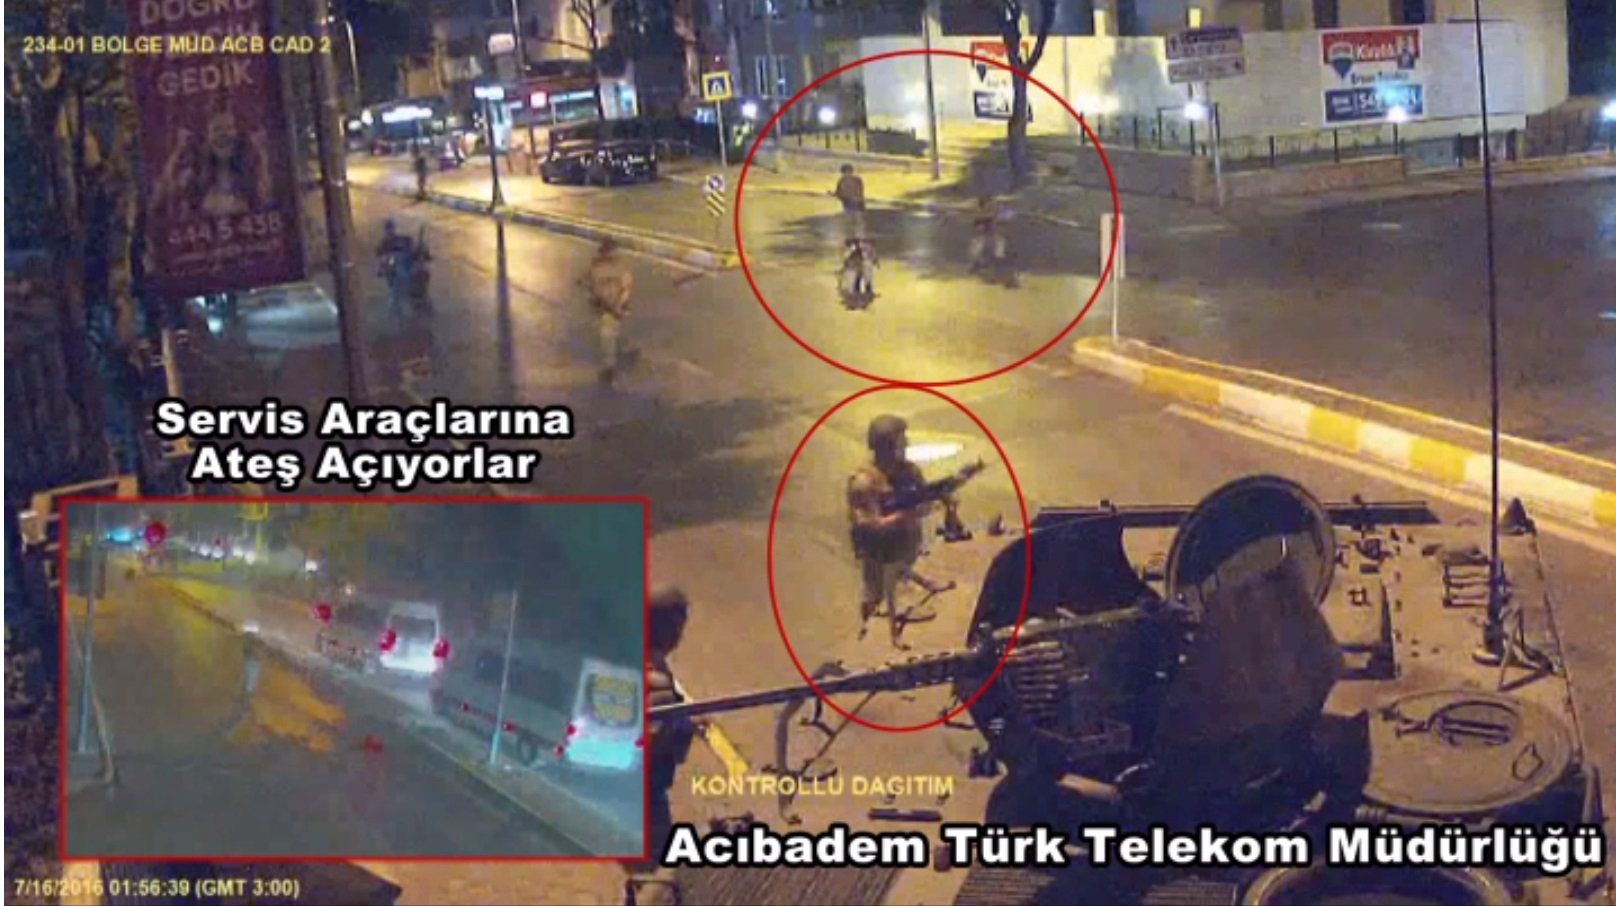 Putschist soldiers who tried to enter the Türk Telekom Directorate in Kadiköy, shot at passing shuttle buses.